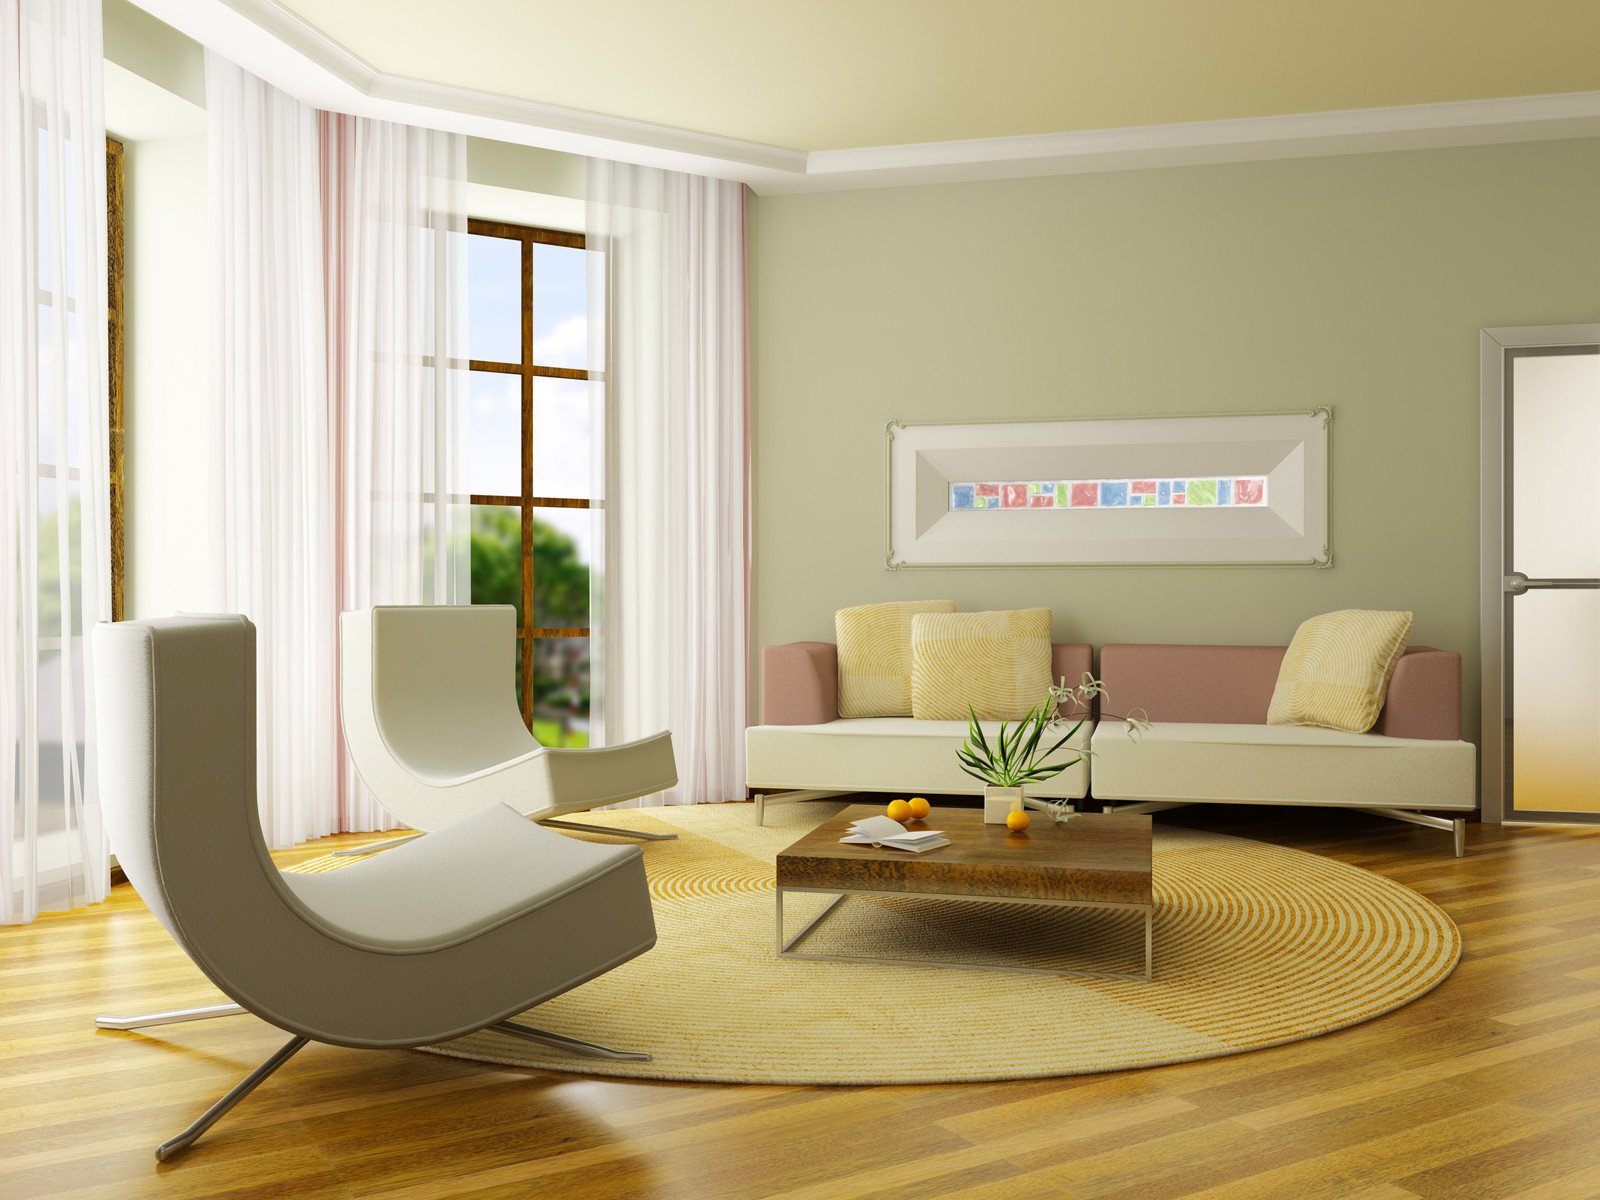 Small Living Room Paint Ideas Paint Ideas for Living Room with Narrow Space theydesign